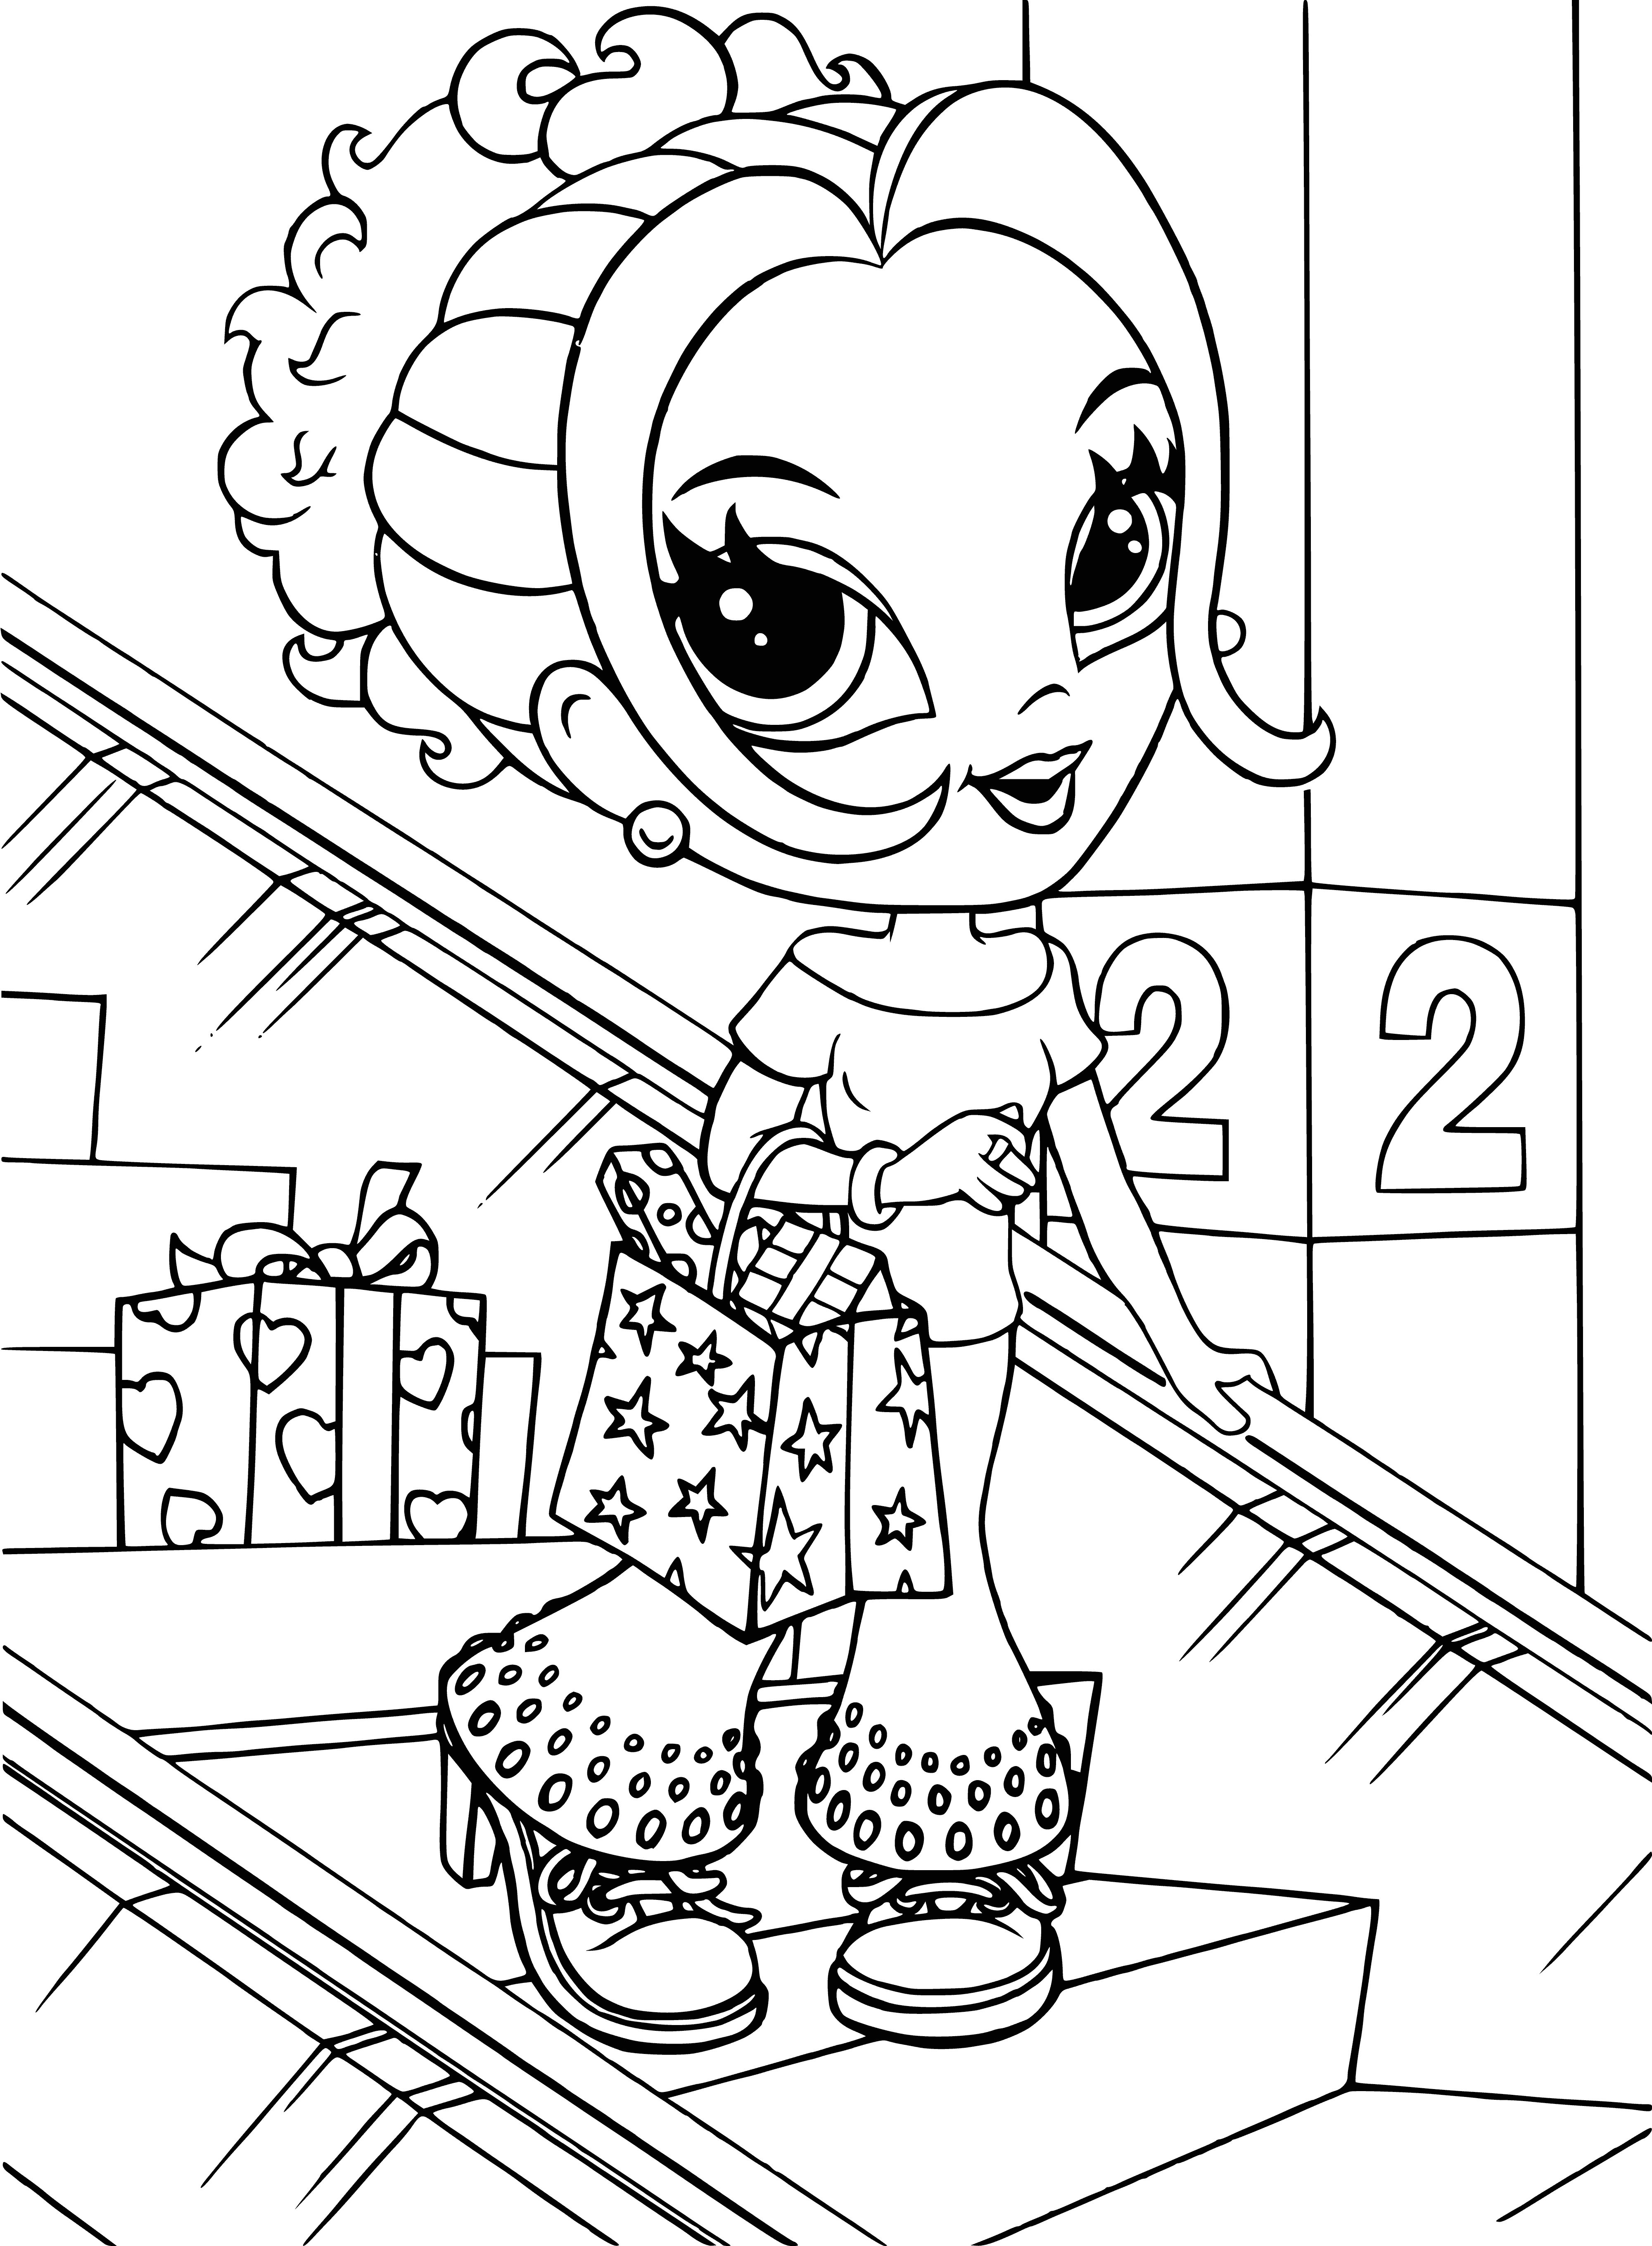 coloring page: Glamour girl with long blonde hair in pink dress stands in front of locker, holding a purse, looking happy and confident. #highschool